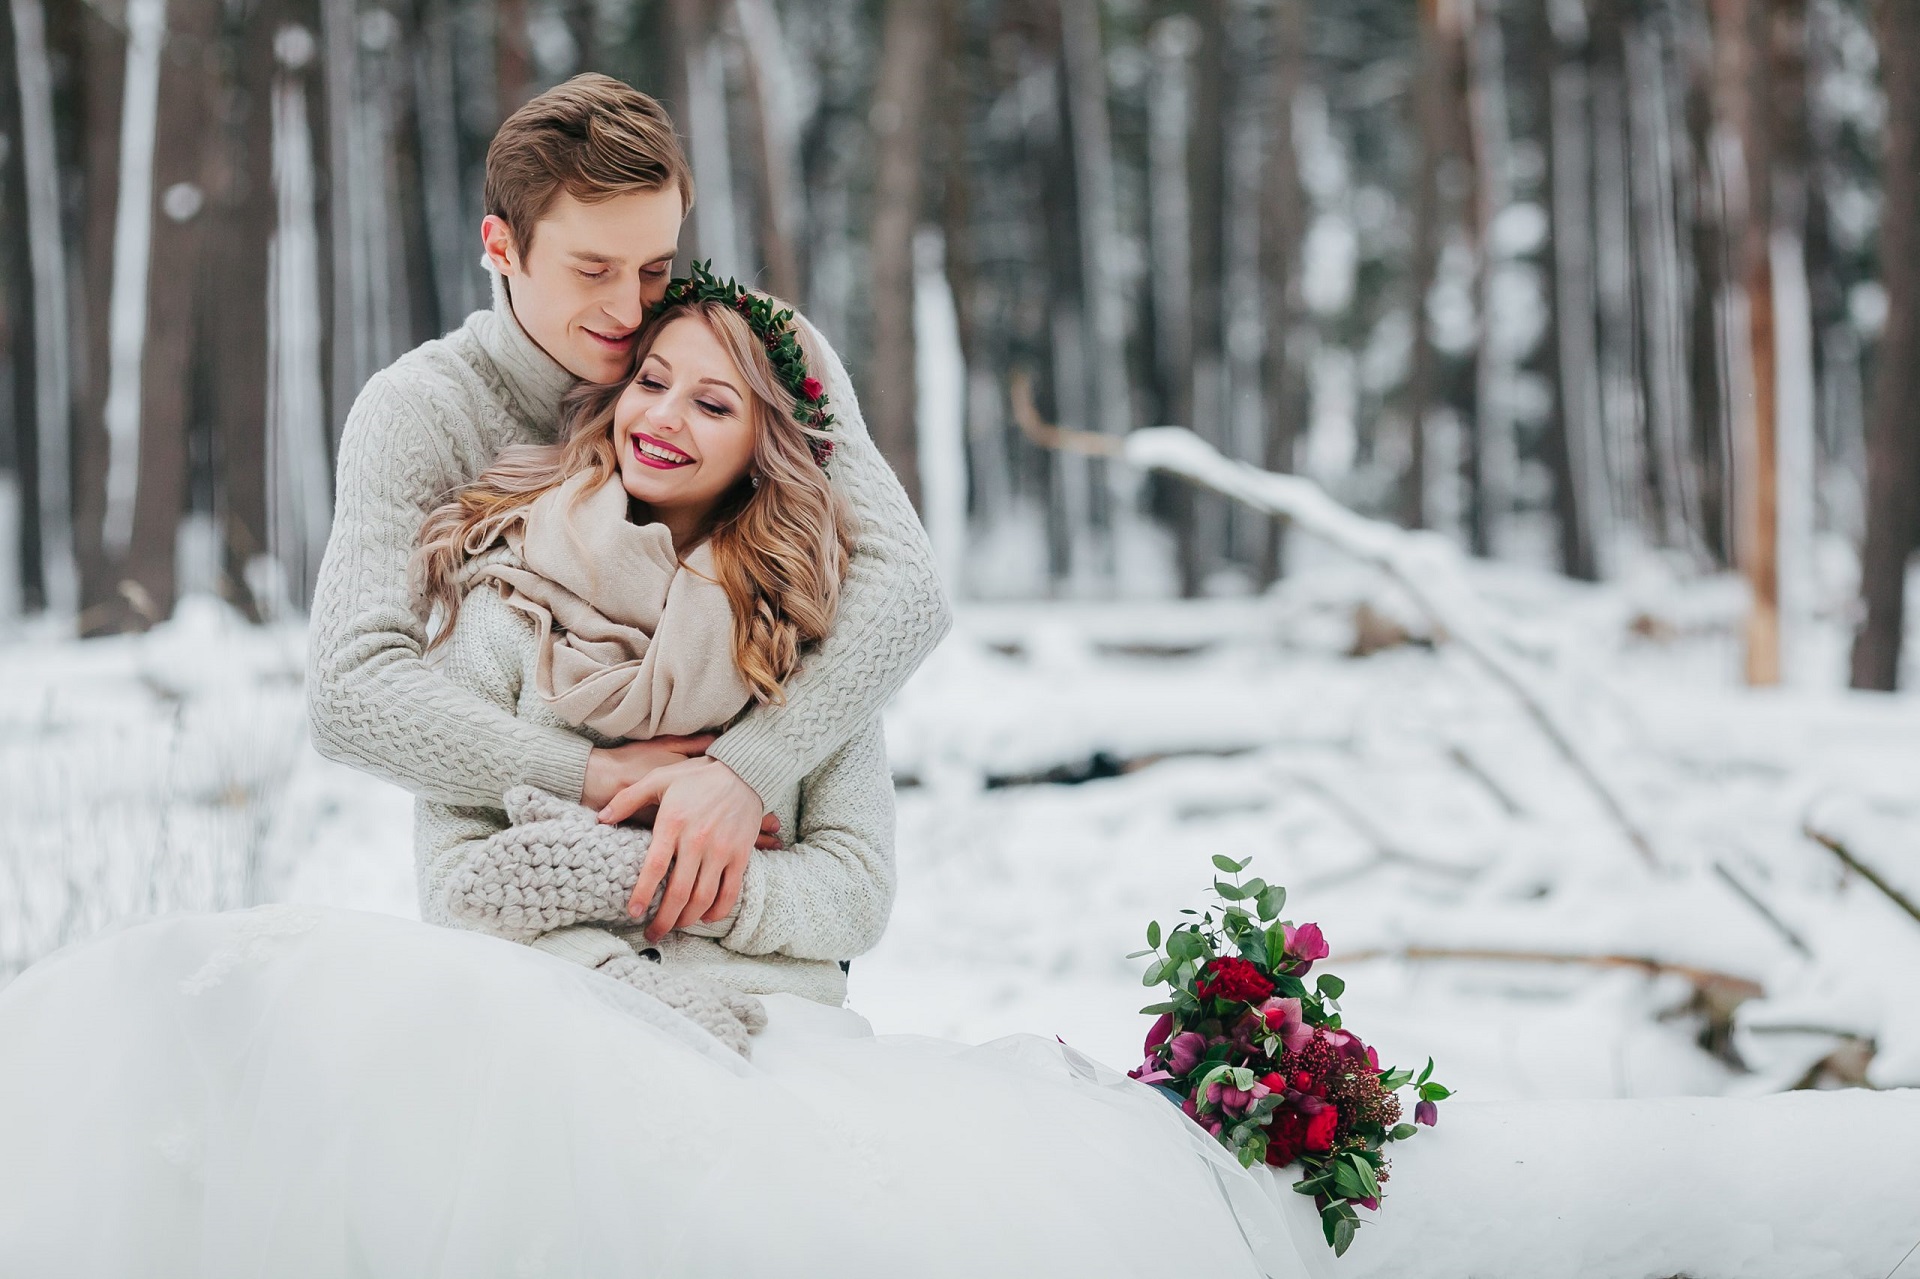 6 Reasons to Get Married in Winter